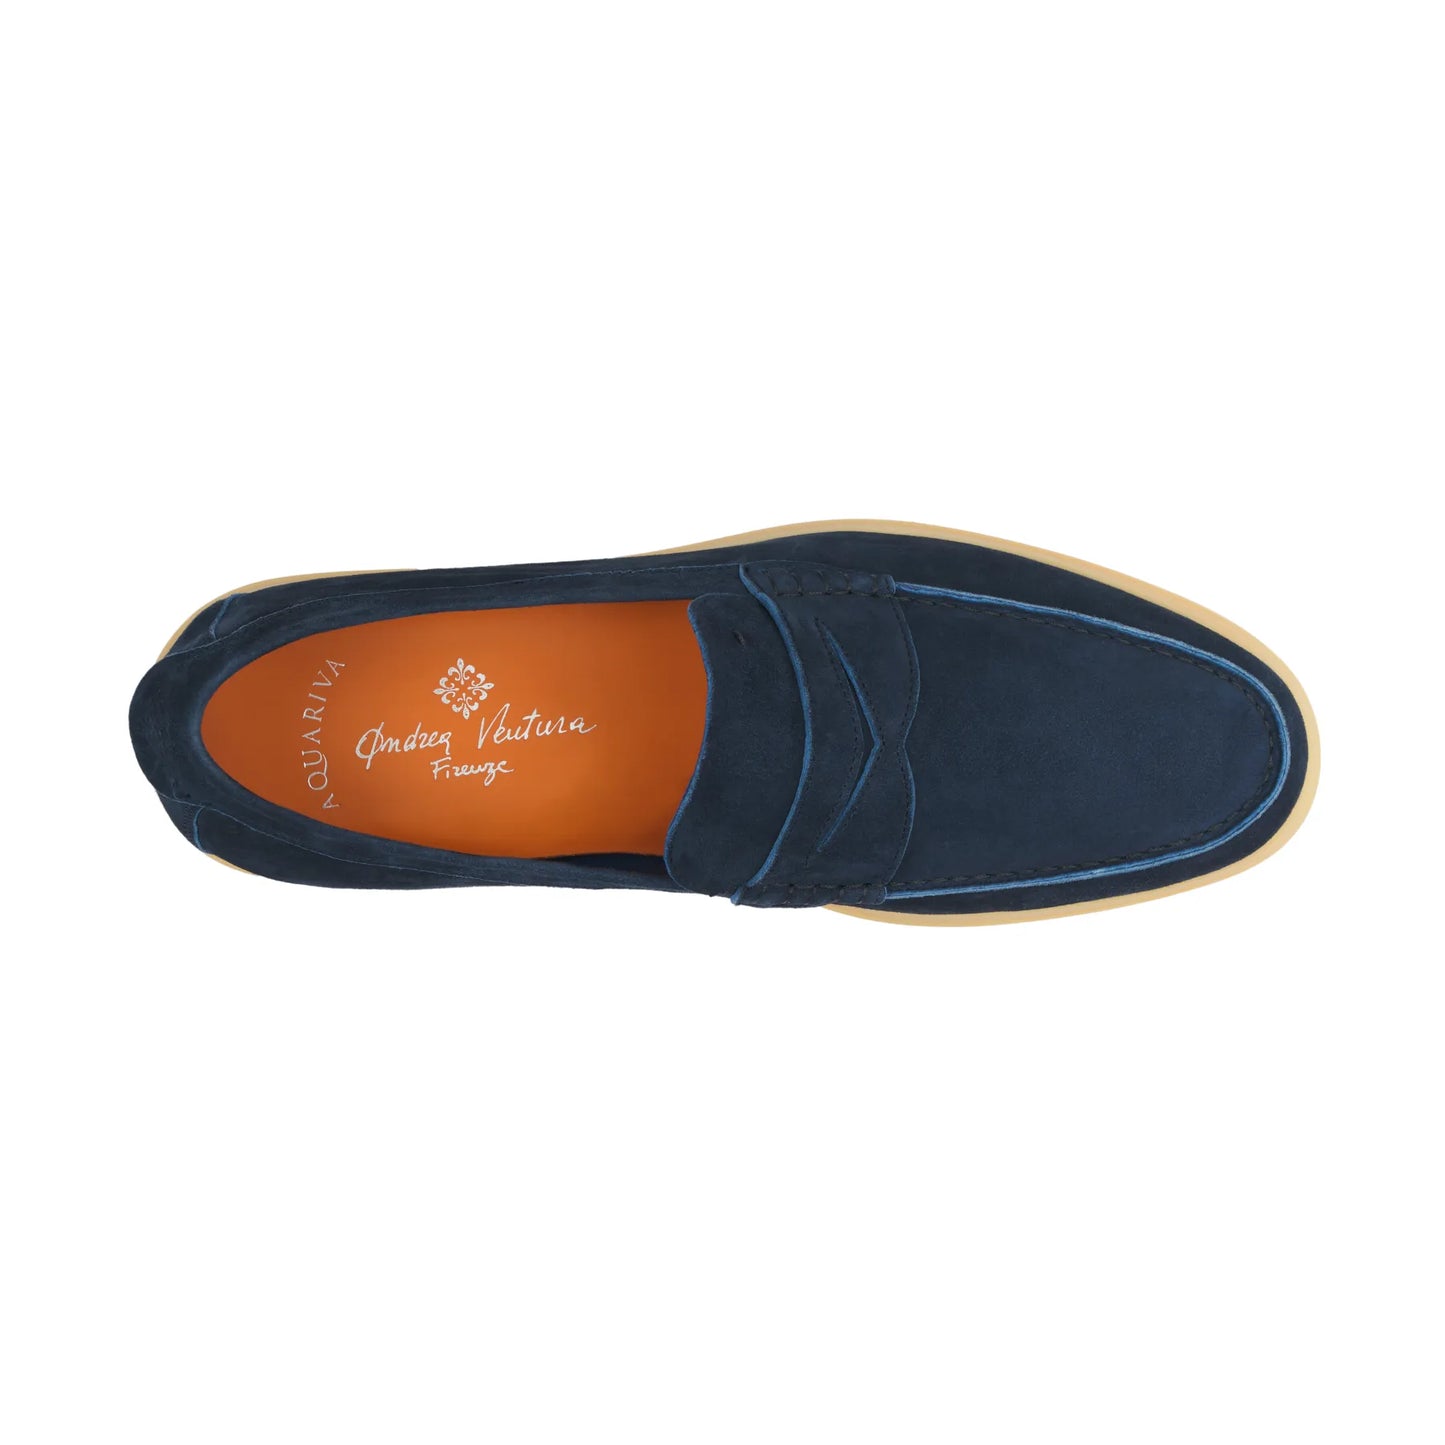 «Aquariva-M» Suede Penny Loafer in Navy Blue